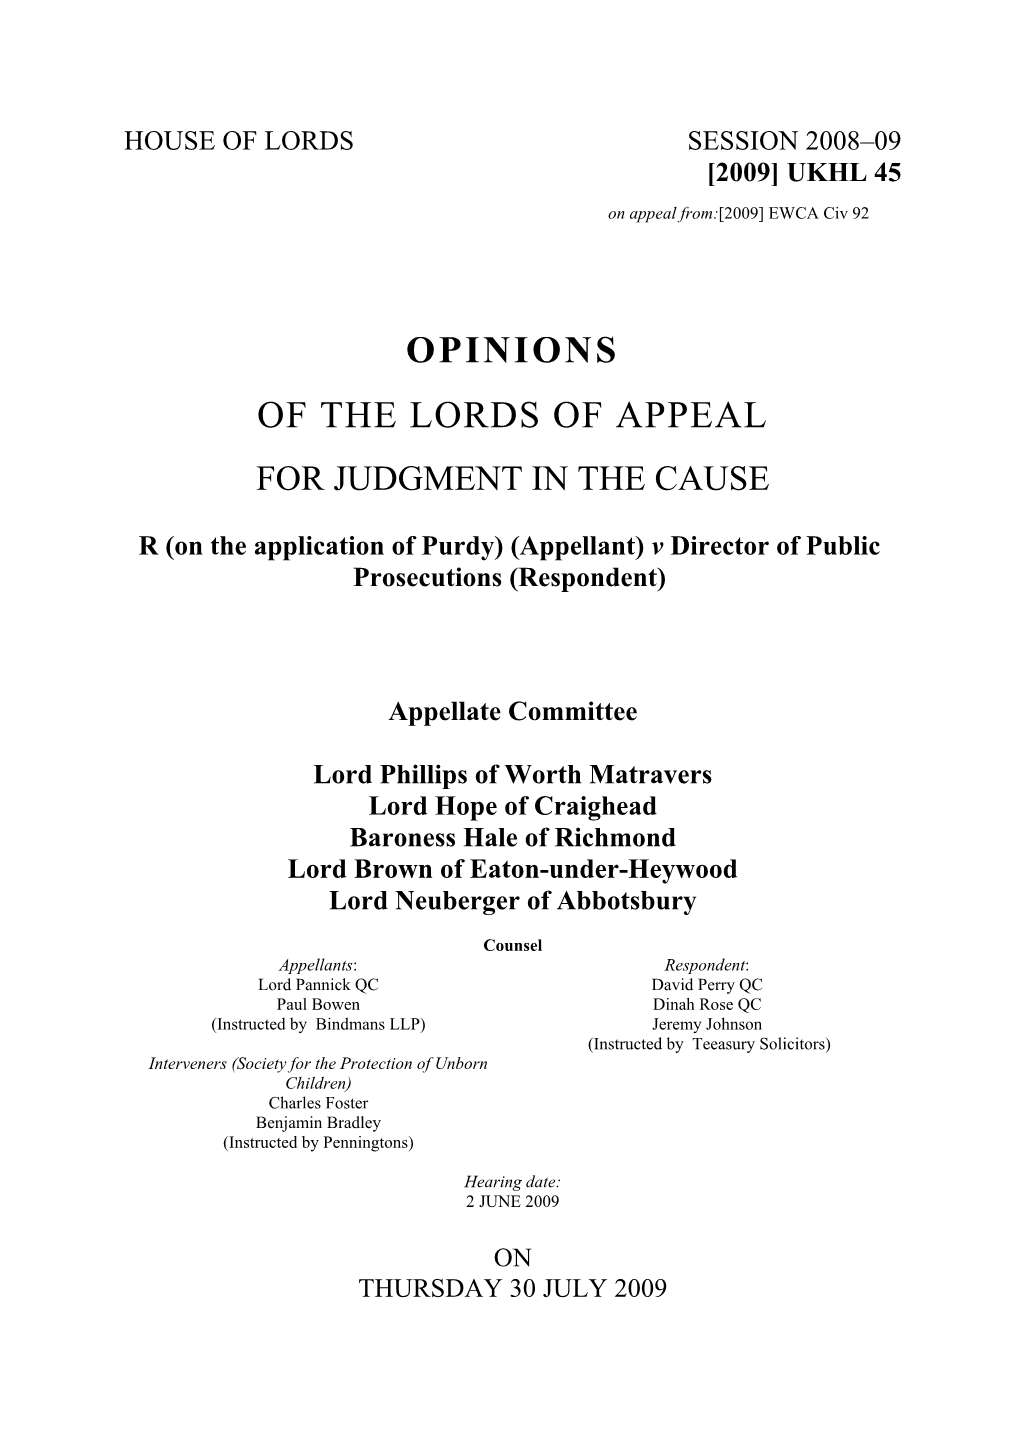 Opinions of the Lords of Appeal for Judgment in the Cause